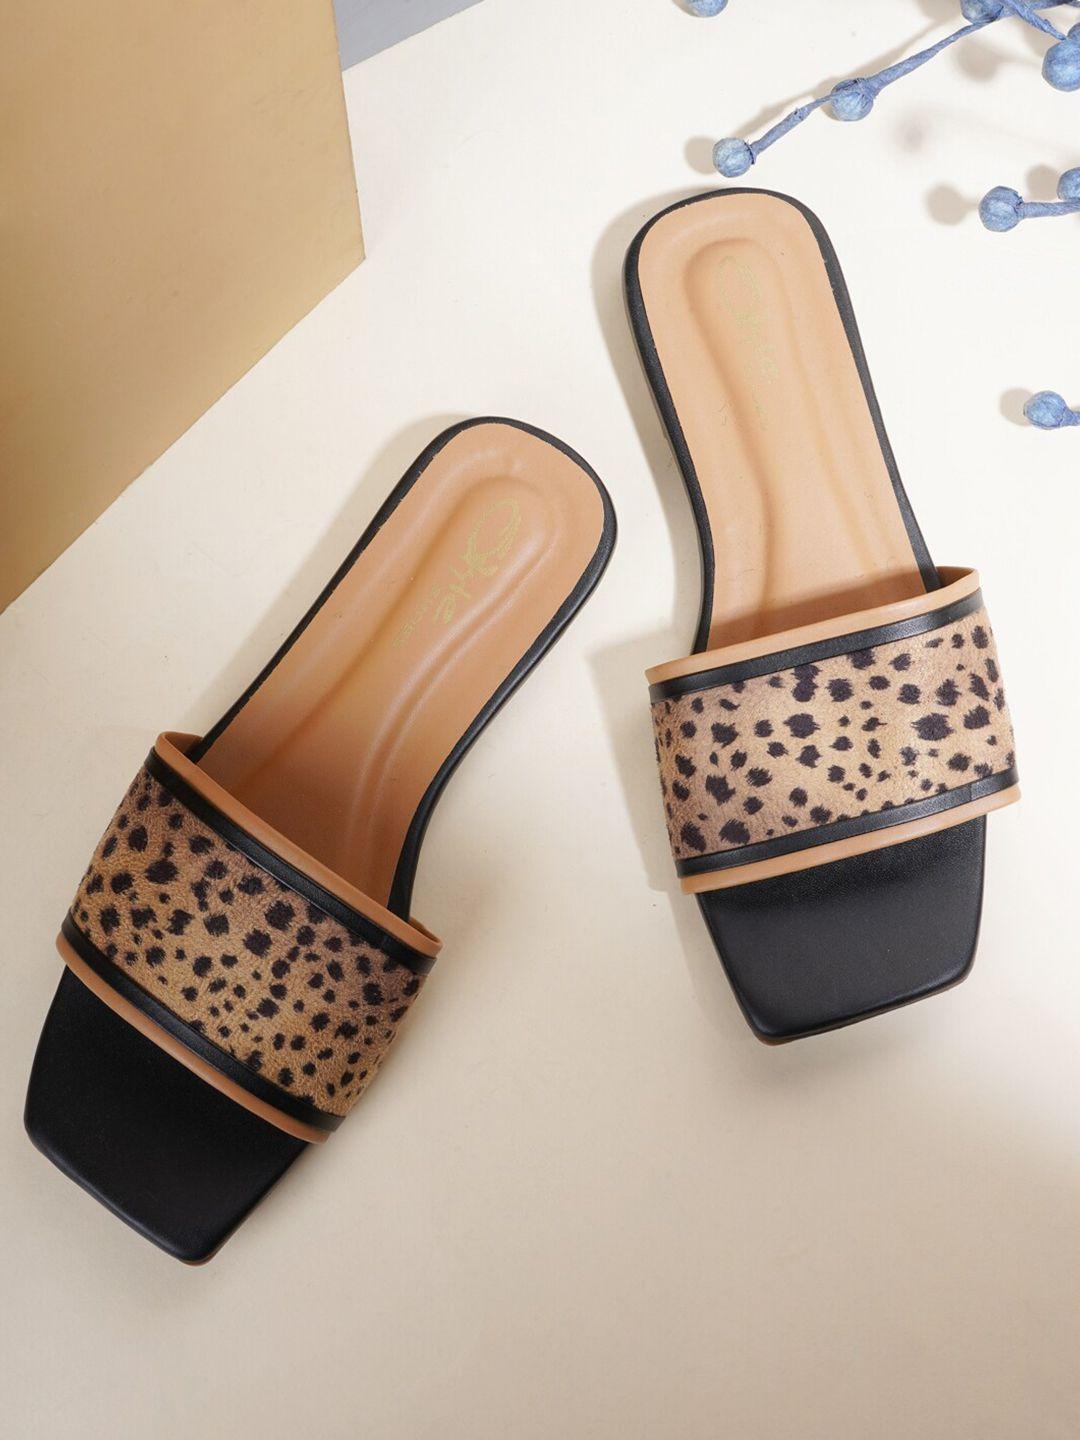 style shoes women brown printed one toe flats